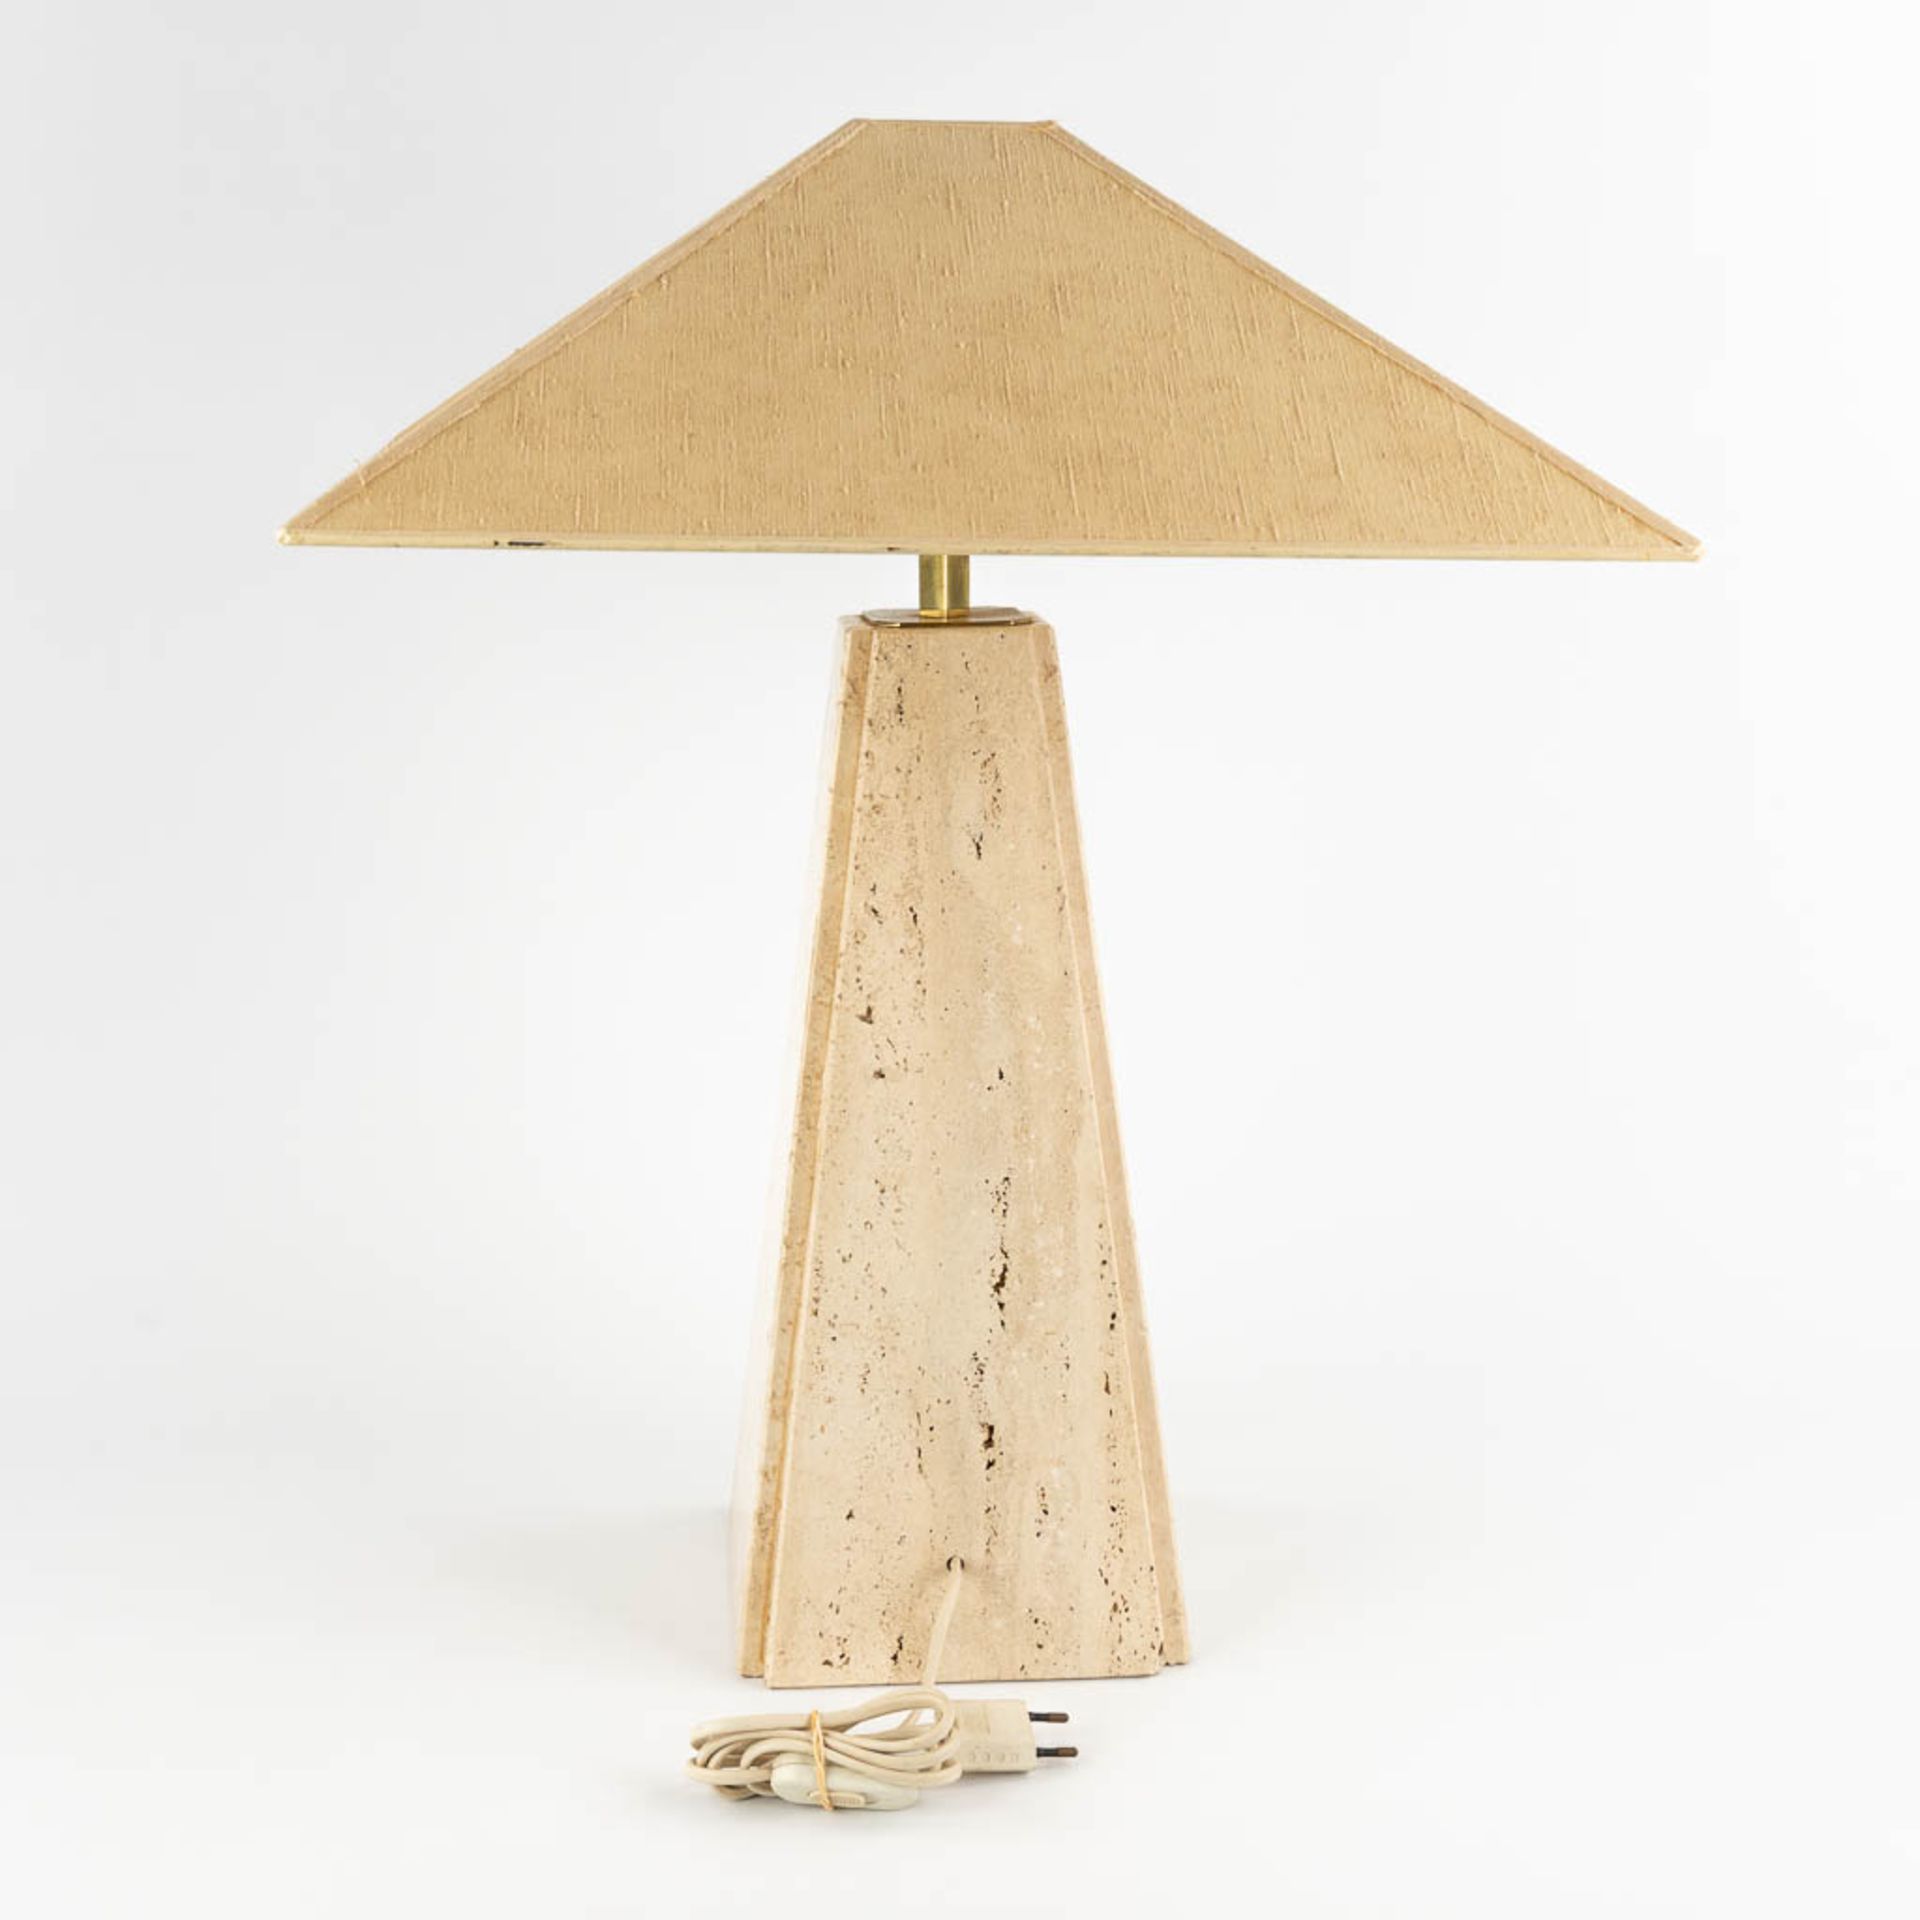 Camille BREESCHE (XX)(attr.) Table lamp, travertine and brass. 20th C. (D:50 x W:50 x H:66 cm) - Image 5 of 11